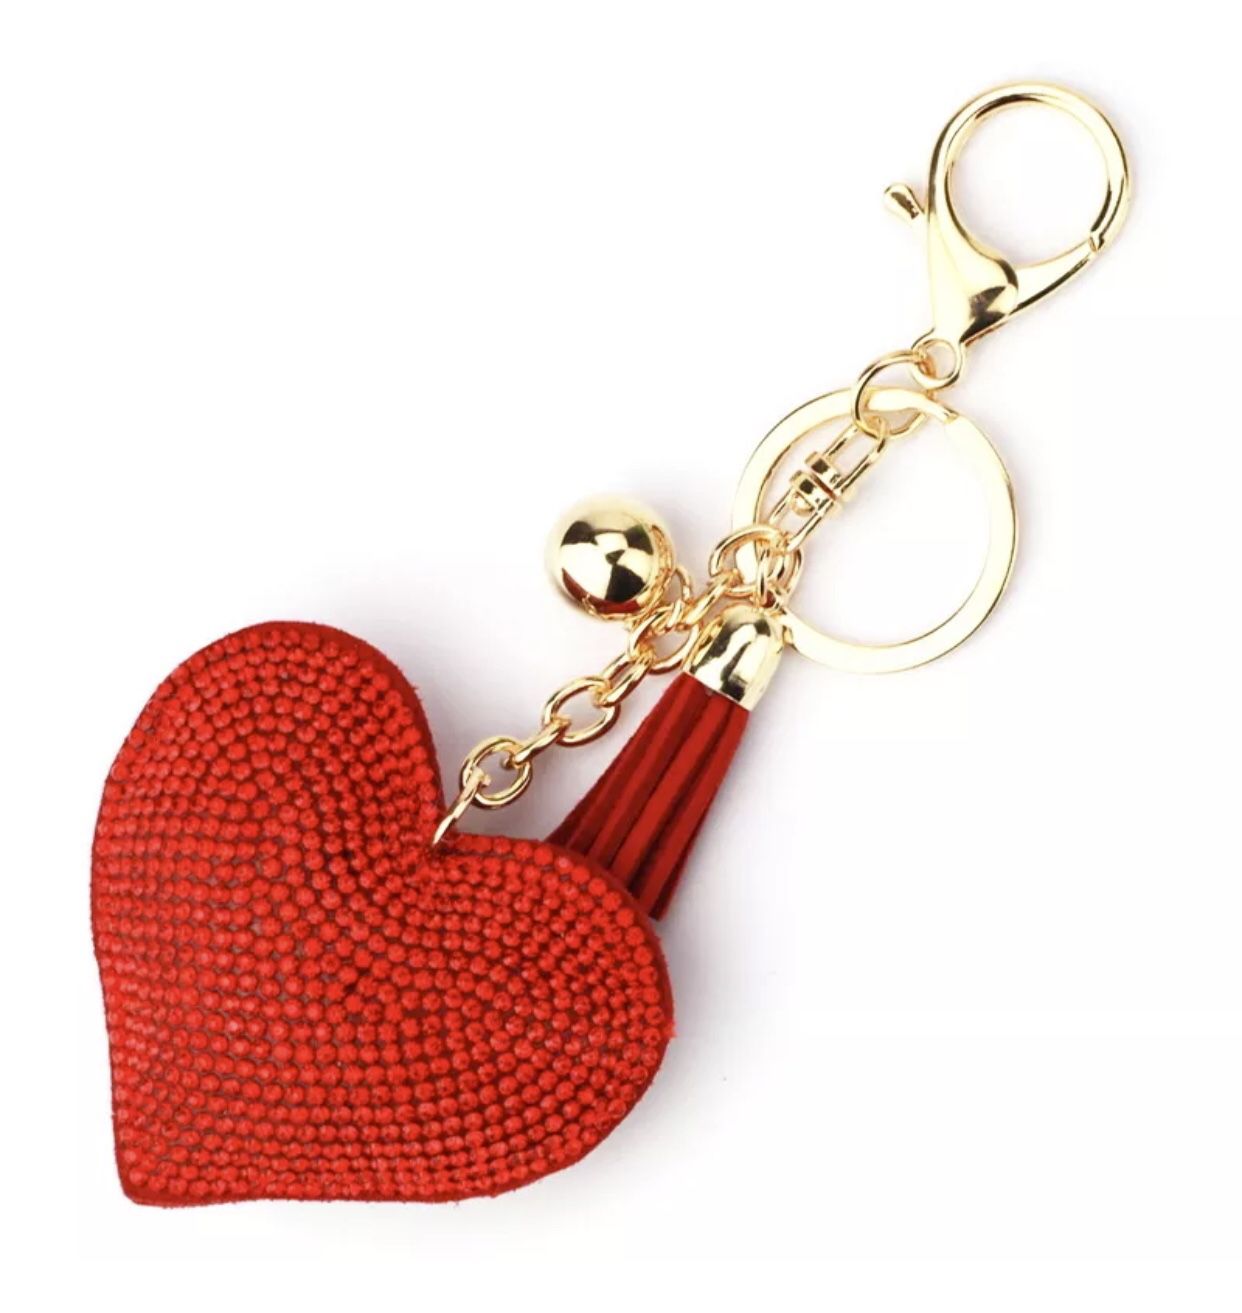 RED GOLD SPARKLY RHINESTONE TASSEL HEART KeyChain PURSE Backpack Tag